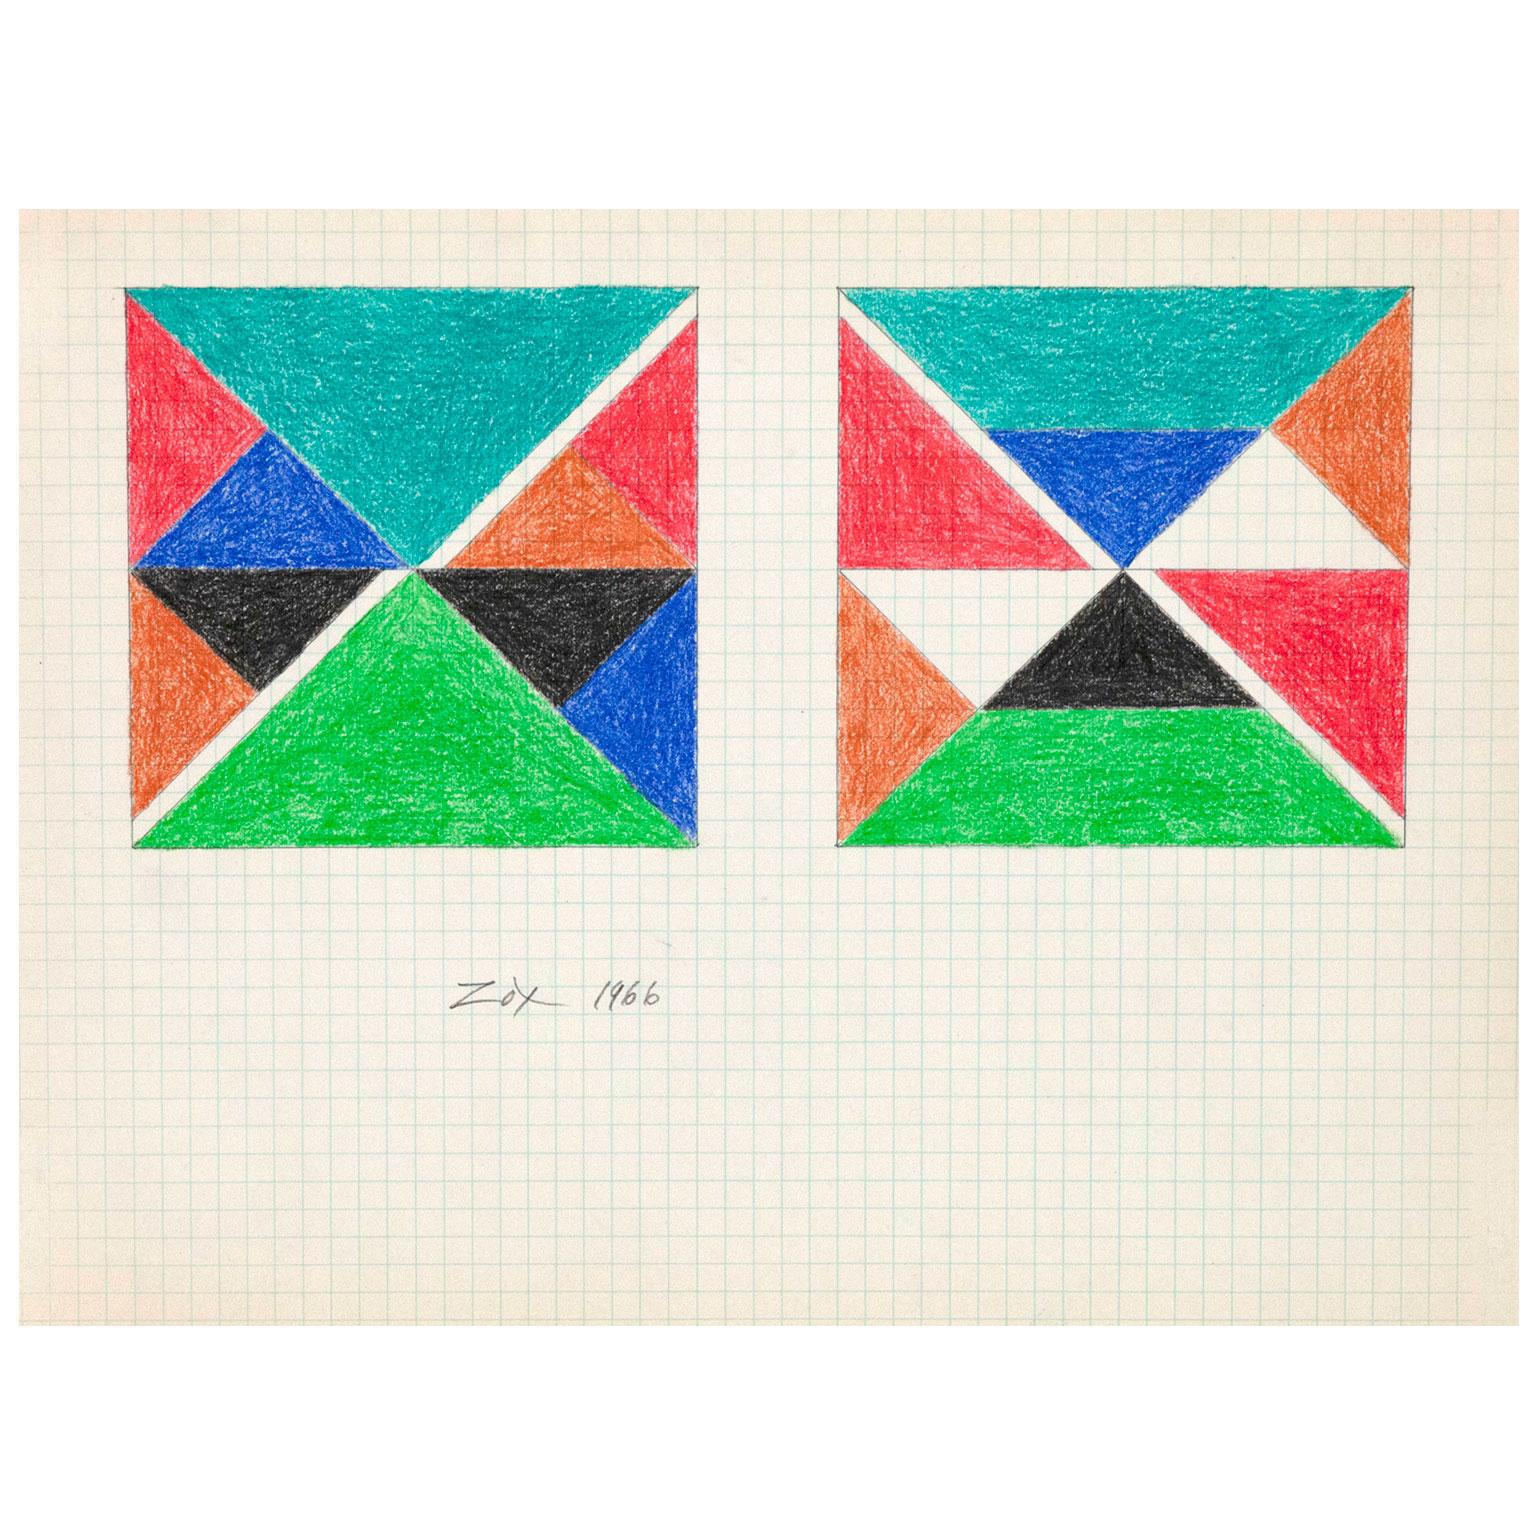 Larry Zox "Teal Top" Drawing, 1966 